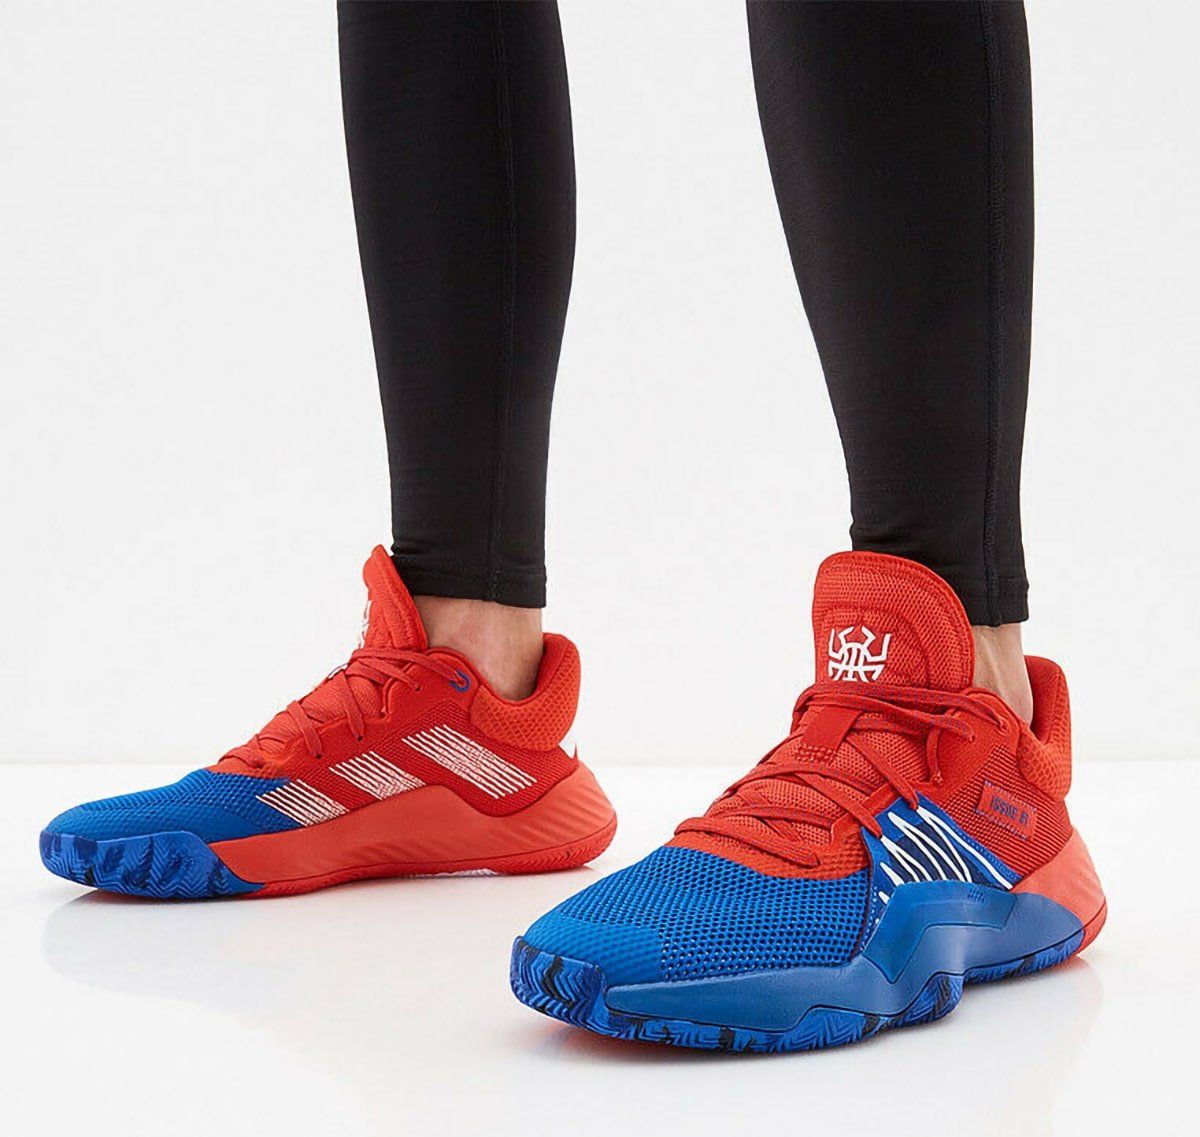 donovan mitchell shoes red and blue